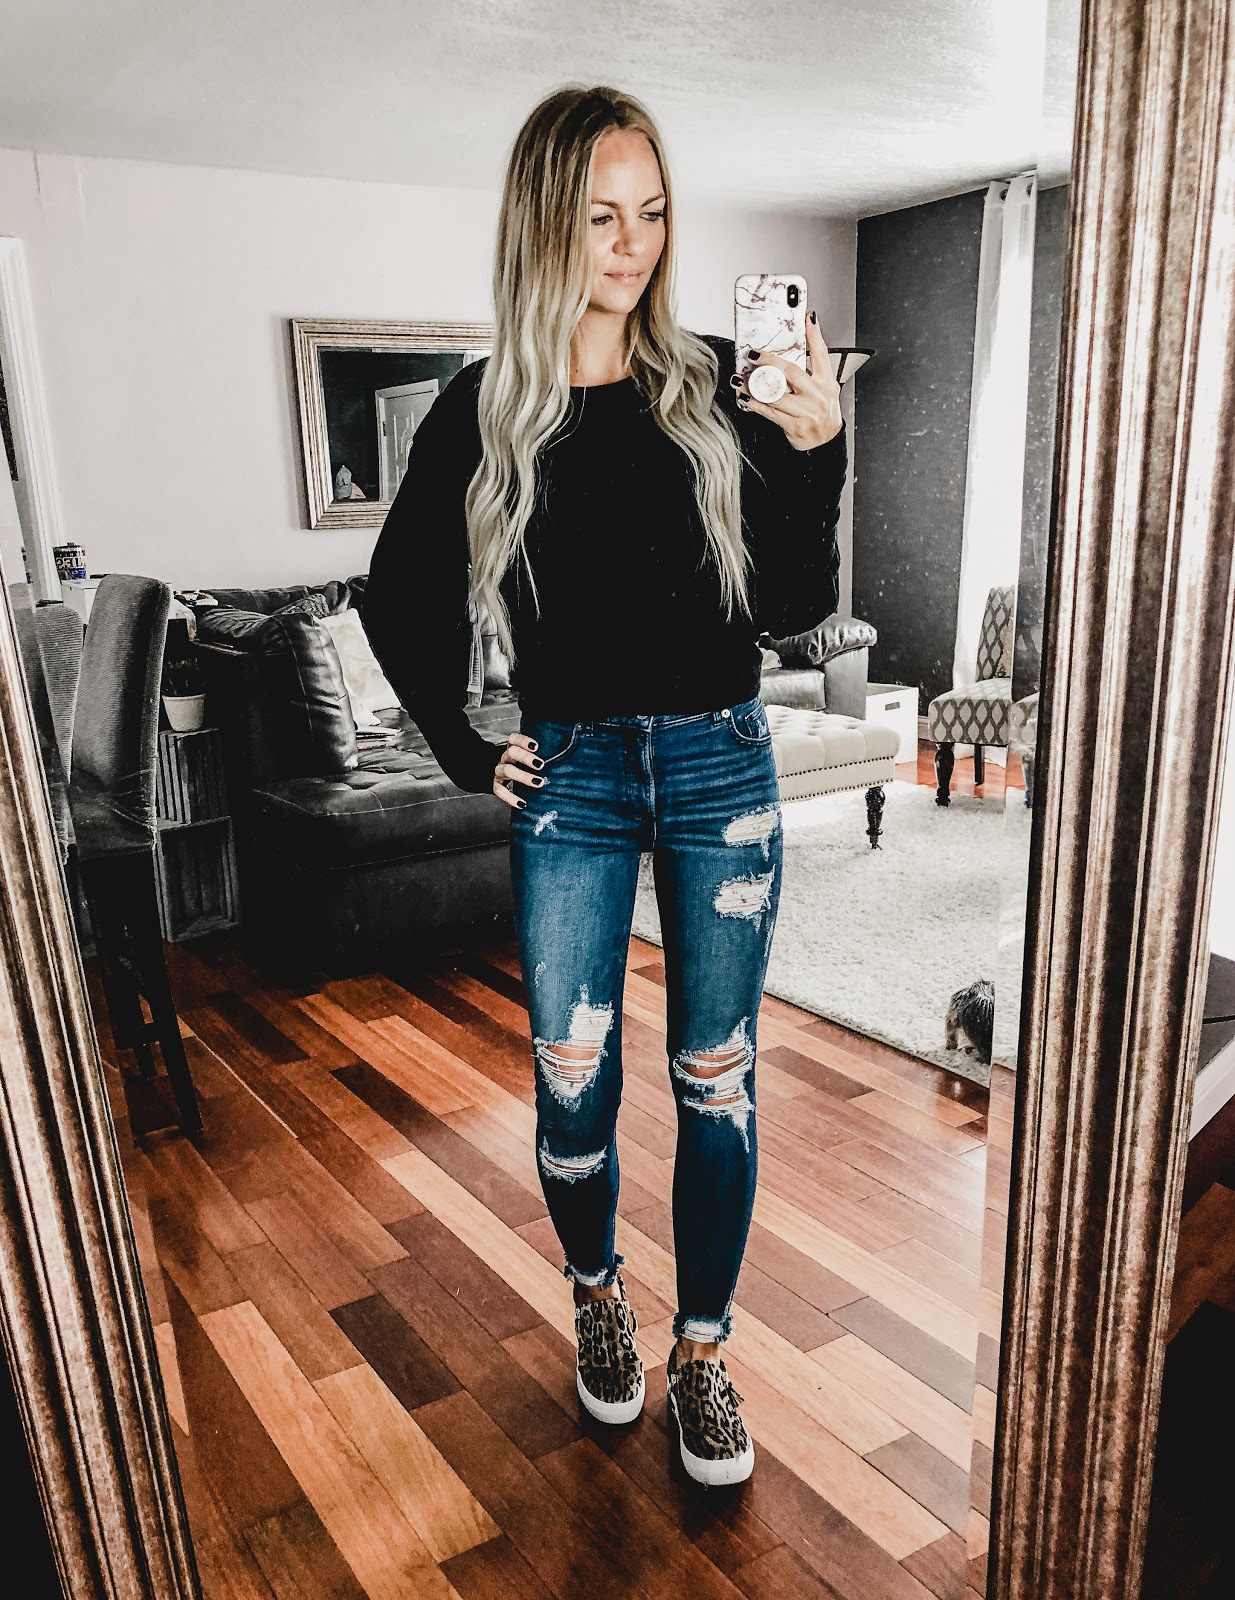 Try-on Haul with Try.com! fall fashion style outfit outfits shopping mom mommy daughter girl girls womens shoes sneakers platform leopard cardigan sweater sweatshirt leggings outfit ideas autumn haul clothing shop